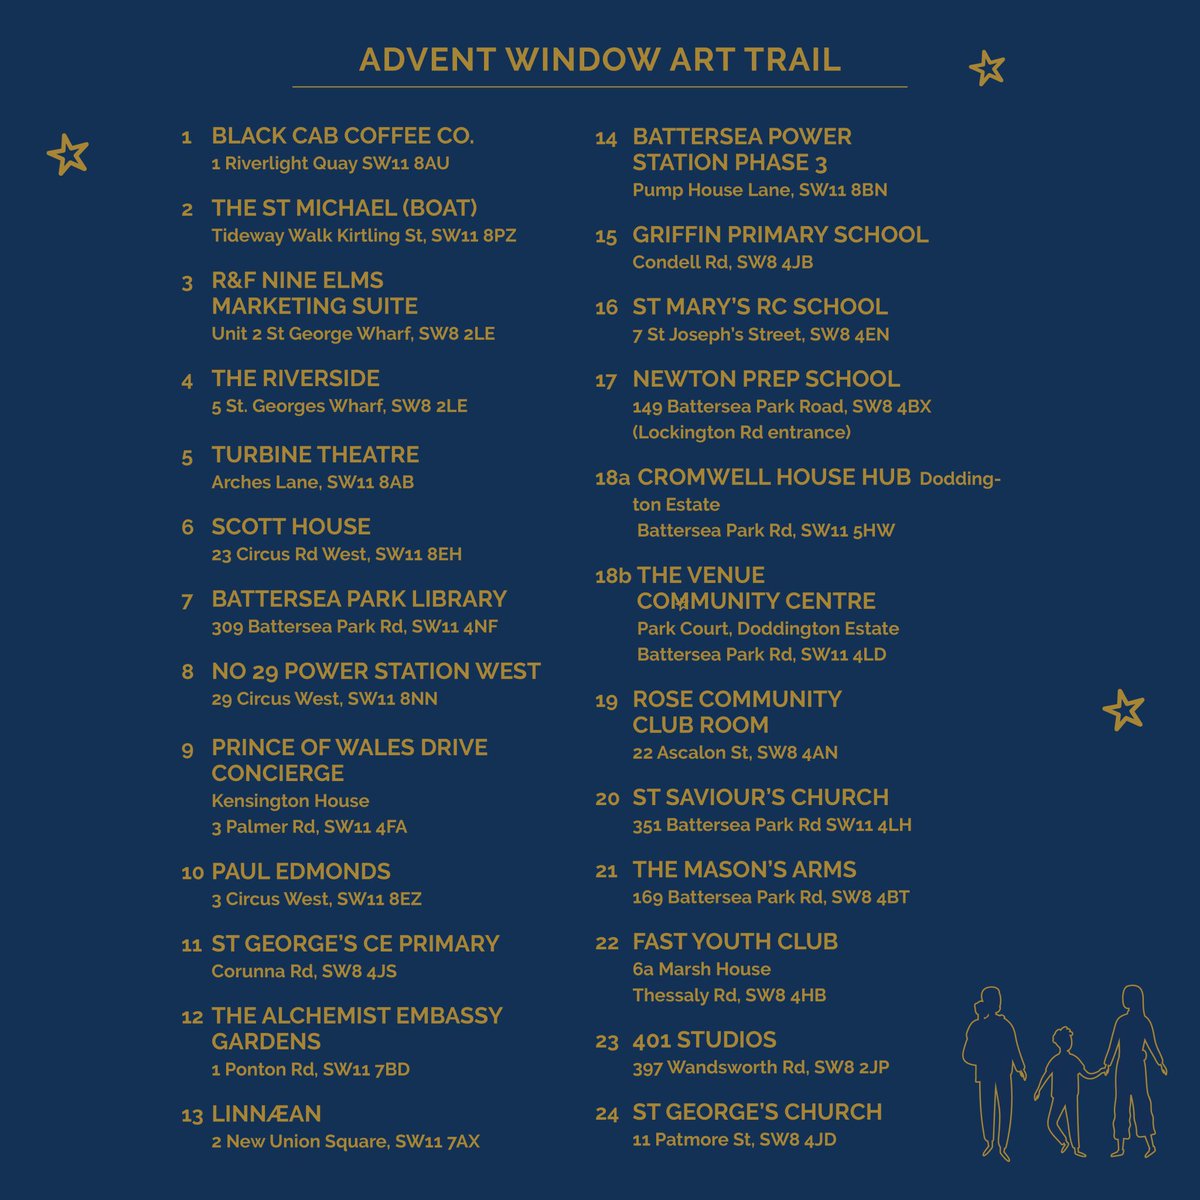 As once again sadly many of our wonderful venues in #NineElms have to close, our #NineElmsAdvent trail remains open - enjoy online and as a Covid-safe outdoor walk till 2nd Jan. Snap pics and post with #nineelmsadvent to share the joy and encourage everyone in these tough times